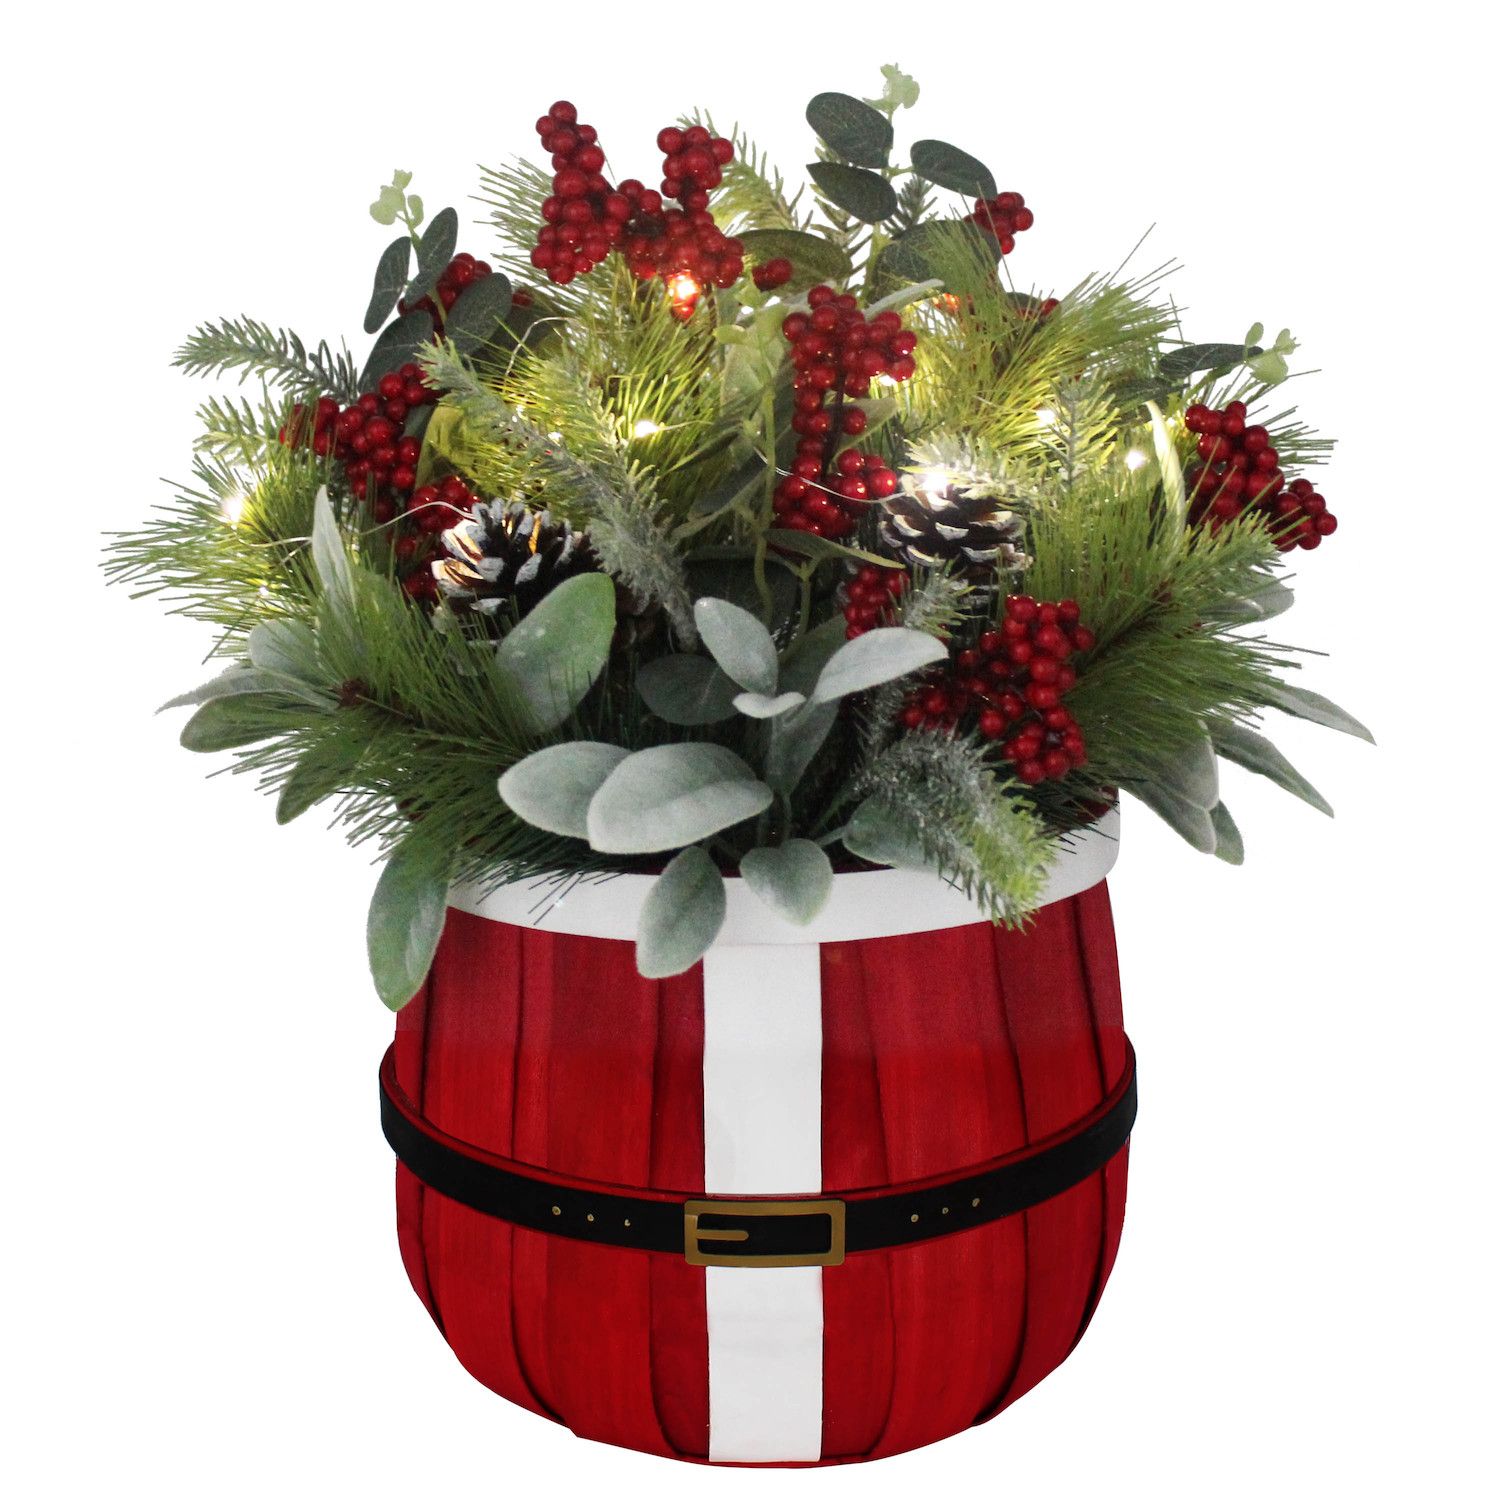 A festive centerpiece with pinecones, berry accents, and seasonal greenery makes a statement.